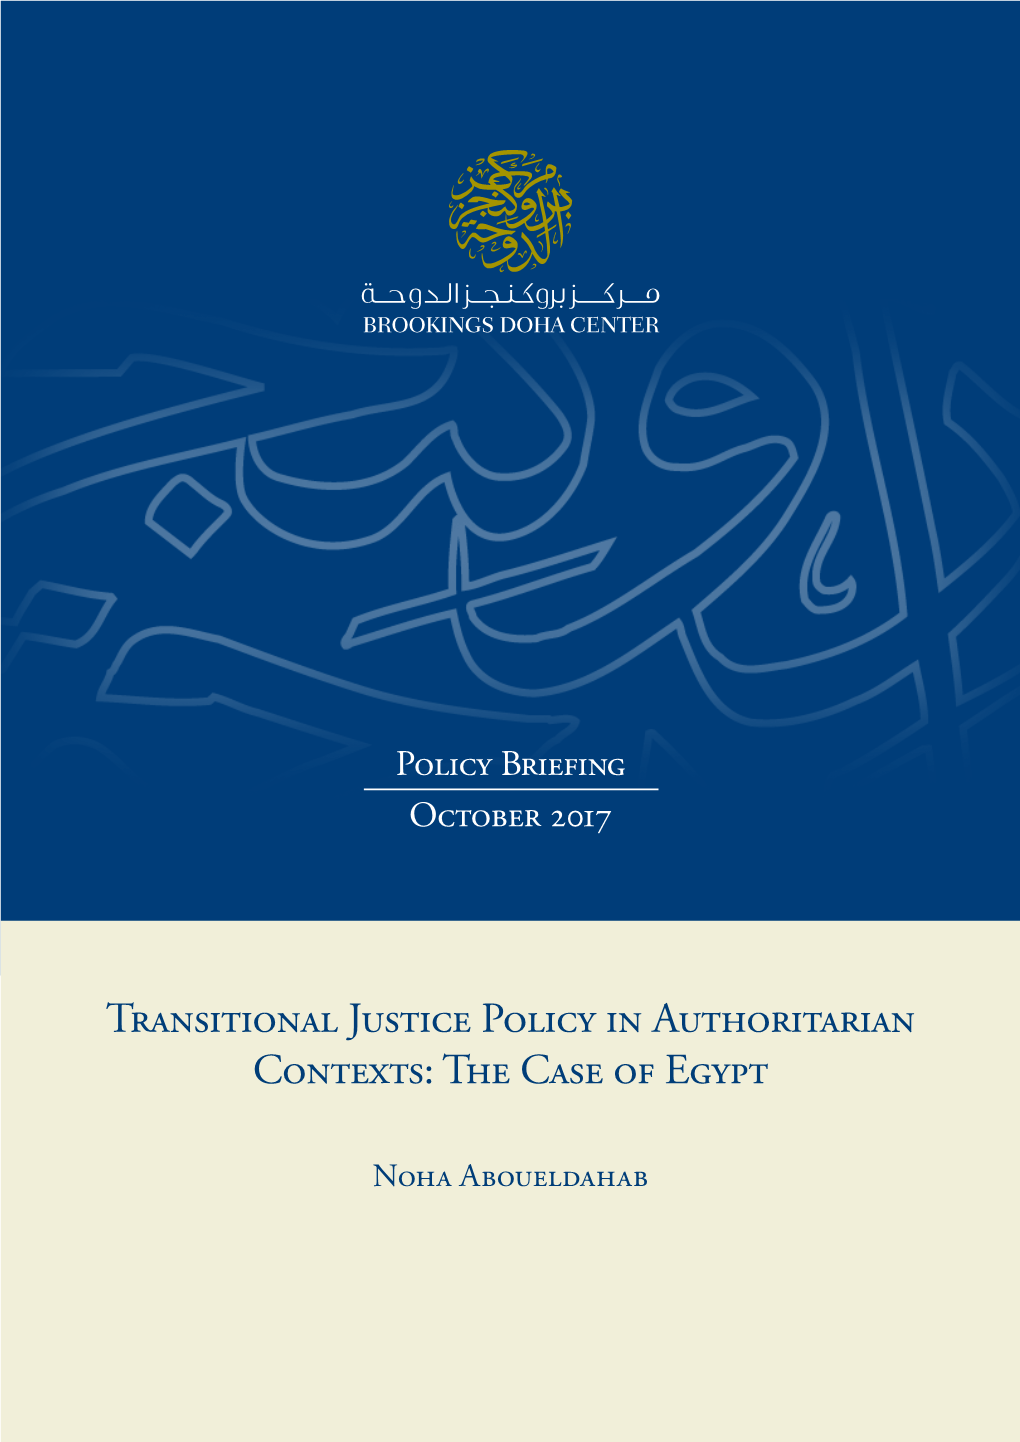 Transitional Justice Policy in Authoritarian Contexts: the Case of Egypt